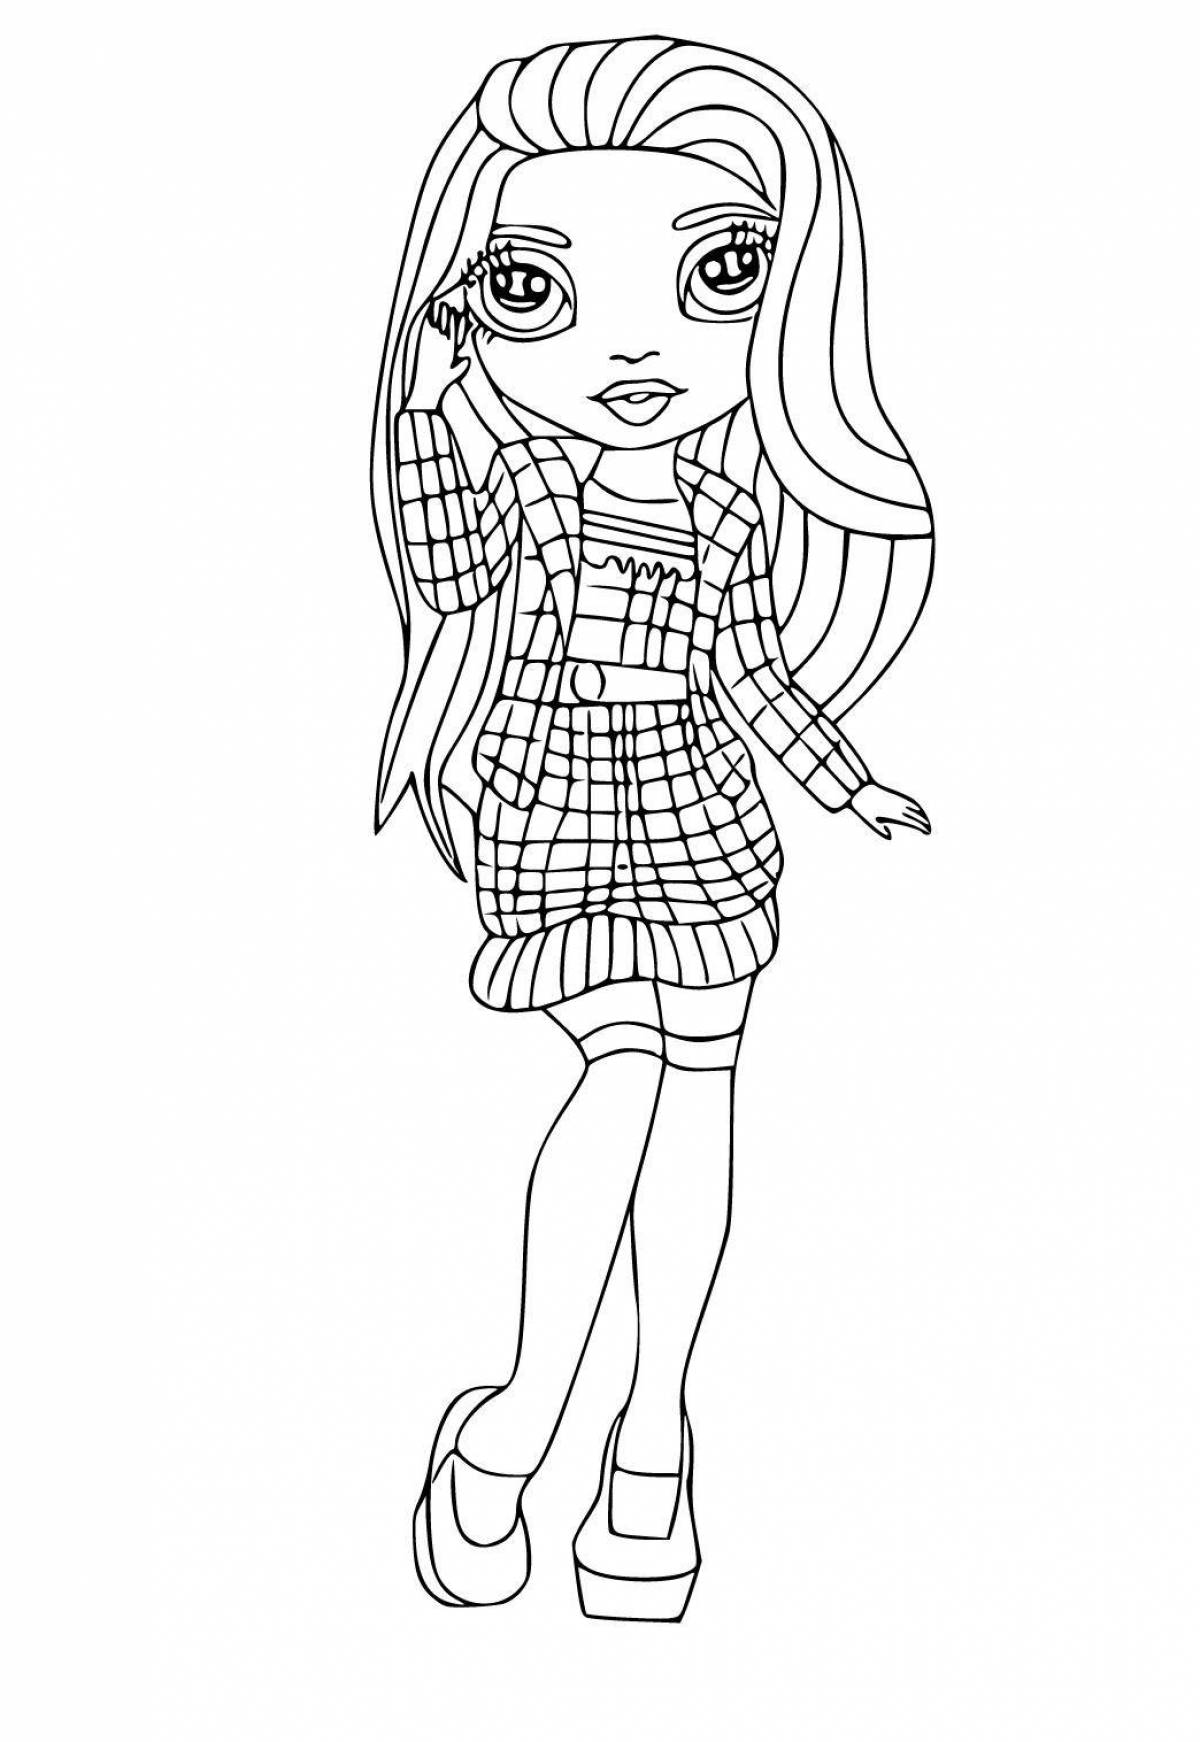 Rainbow high fun coloring page